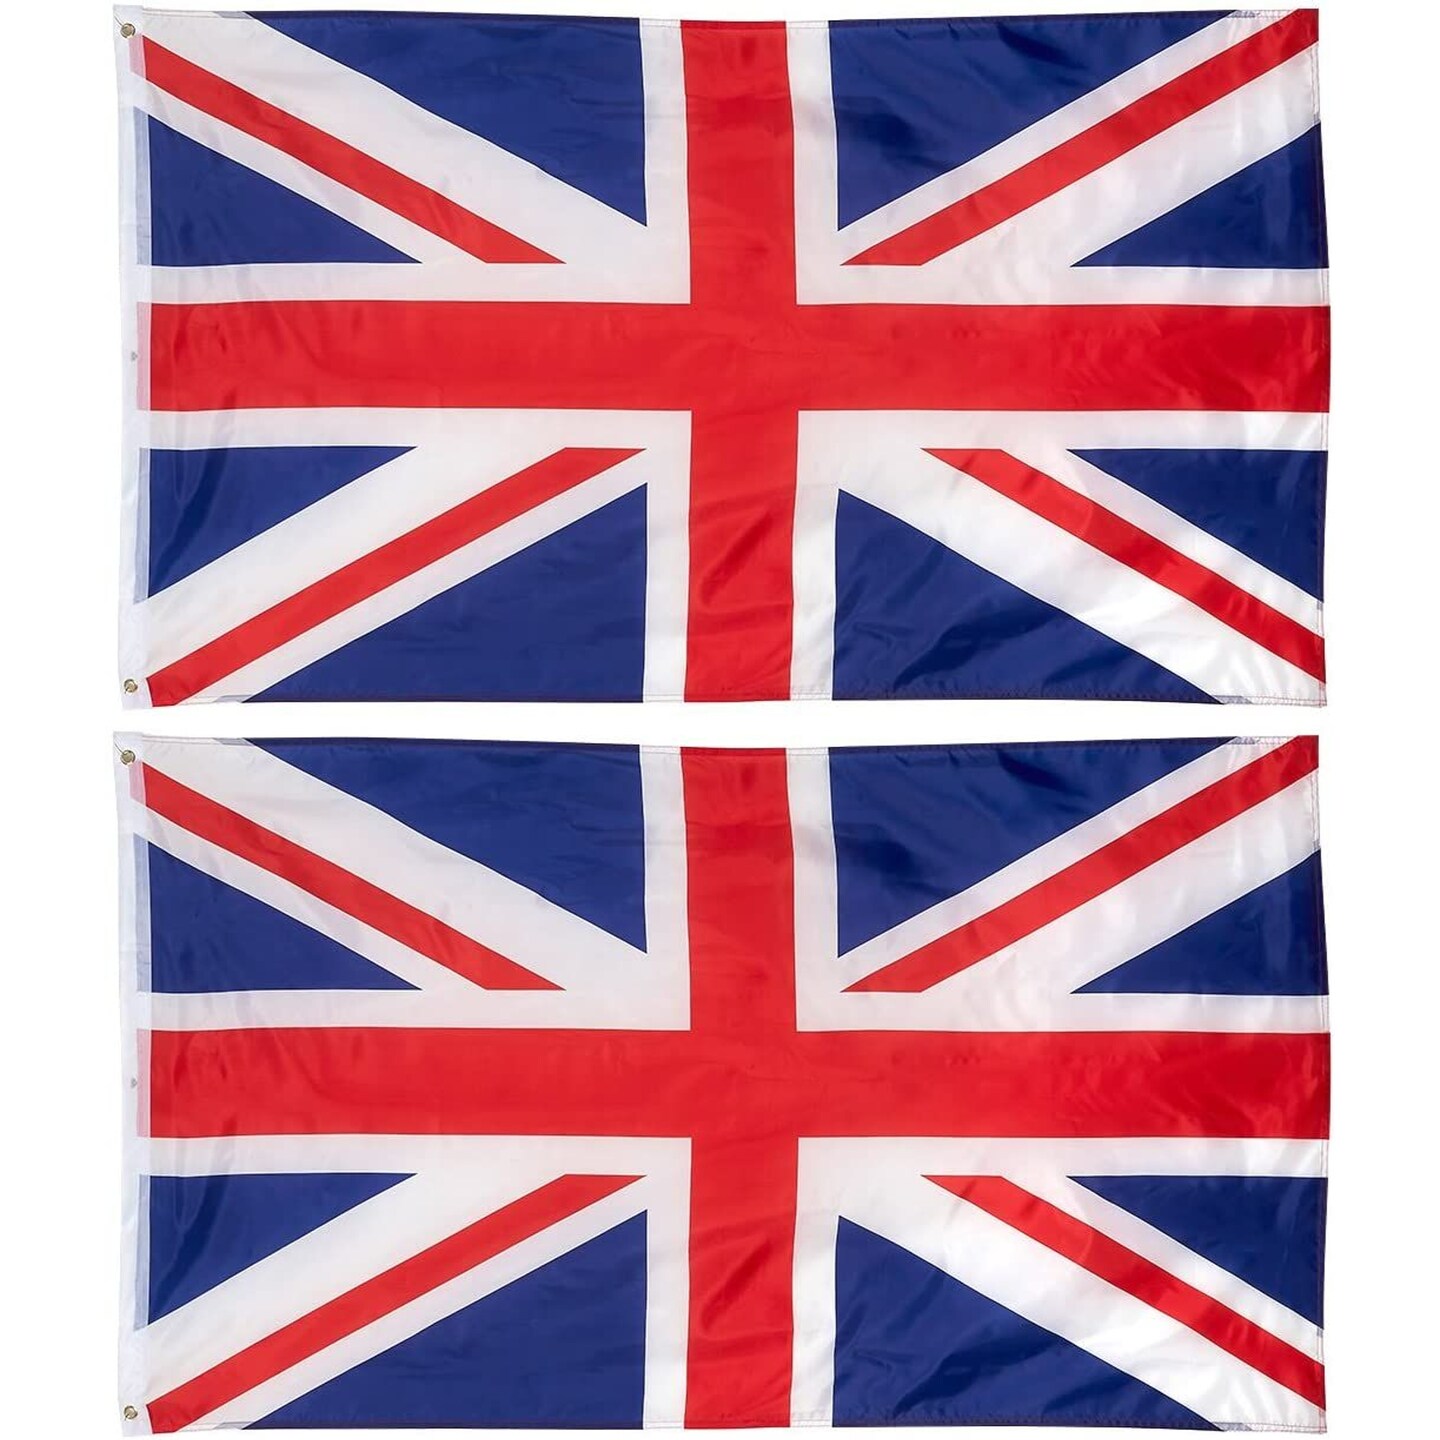 2-Piece Uk Flags - Outdoor 3X5 Feet United Kingdom Flags, British National  Flag Banners, Double Stitched Polyester Flags with Brass Grommets,  Decorations for Parties and Festivals, 3 X 5 Feet